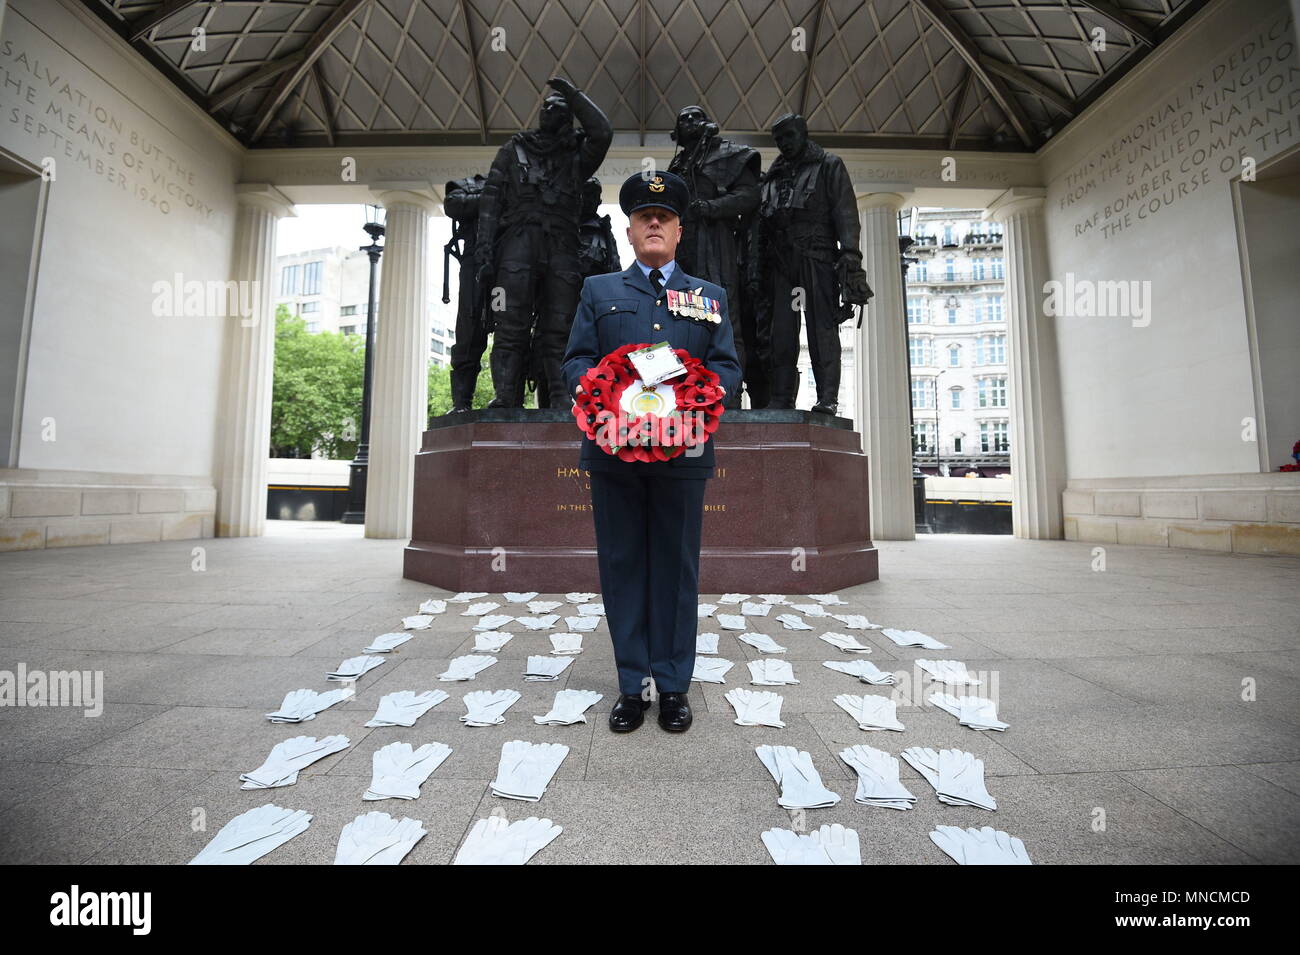 Flight Lieutenant Nigel Painter holds a wreath as he stands among 53 pairs of flying gloves at the Bomber Command Memorial in London's Green Park which represent the men who died in the Dambusters raids in 1943, part of a series of special events marking 75 years since a brave band of airmen took part in one of the most daring raids of the Second World War. Stock Photo